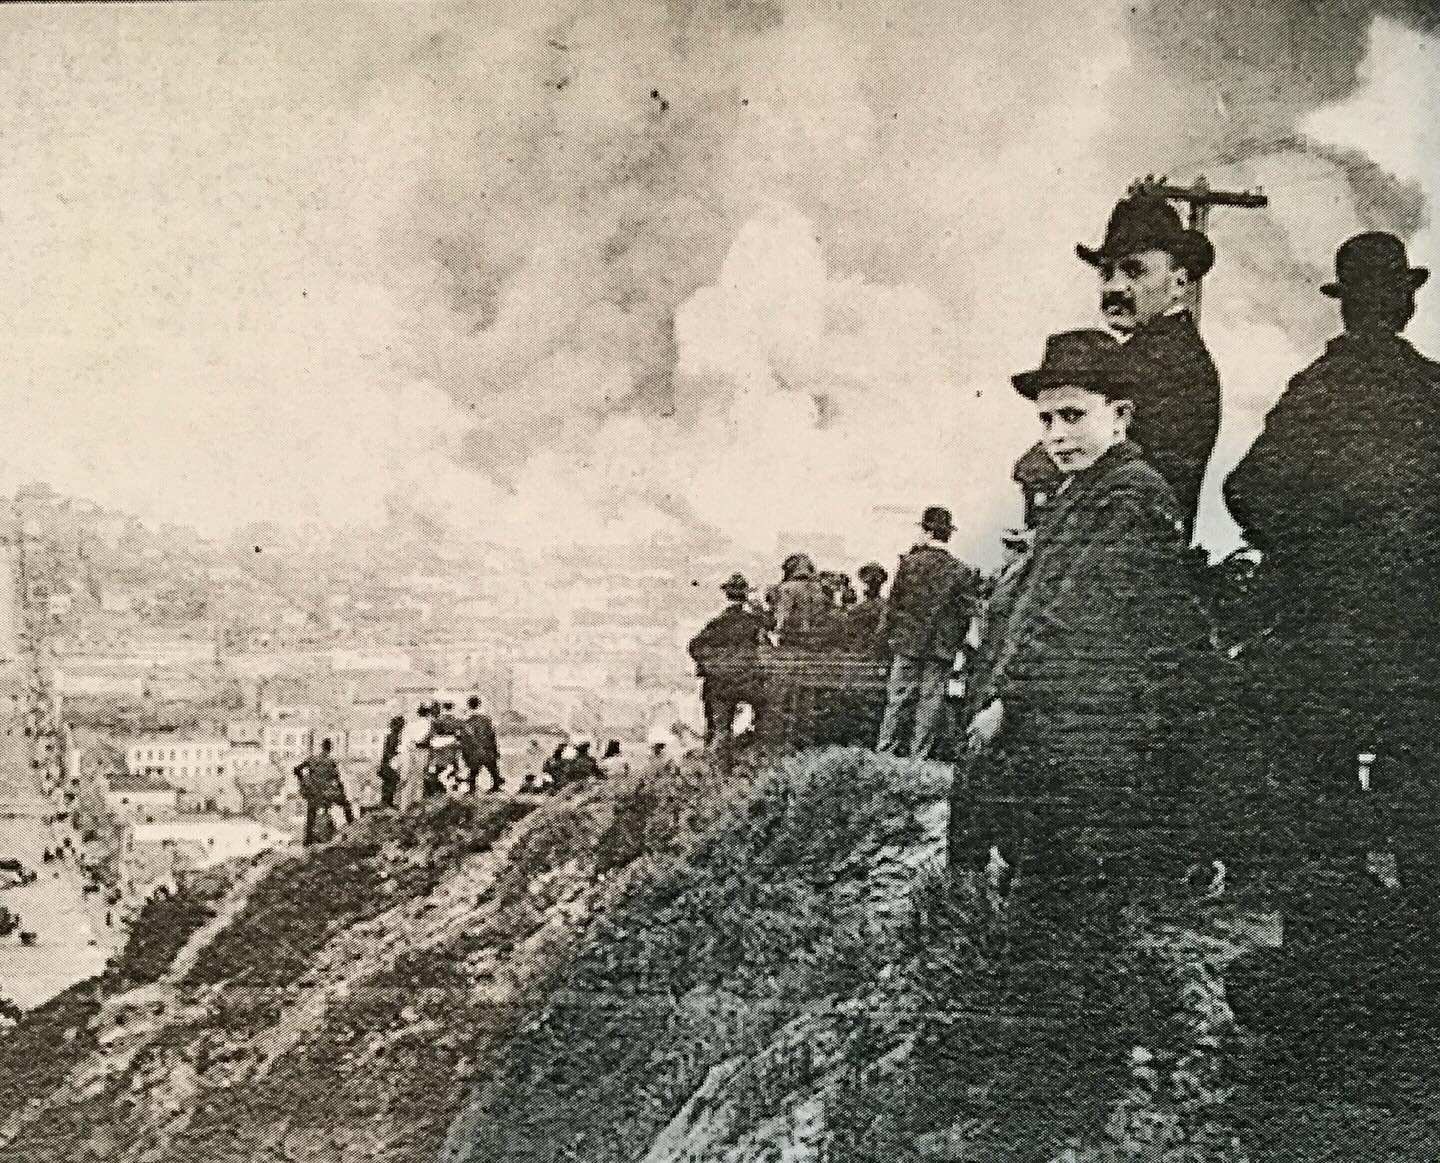 On April 18, 1906 the great quake of San Francisco shook the city just before dawn. As dawn came on and people fled their devastated houses, they saw on the horizon the first puffs of smoke. Downtown was on fire. The city would burn for the next seve